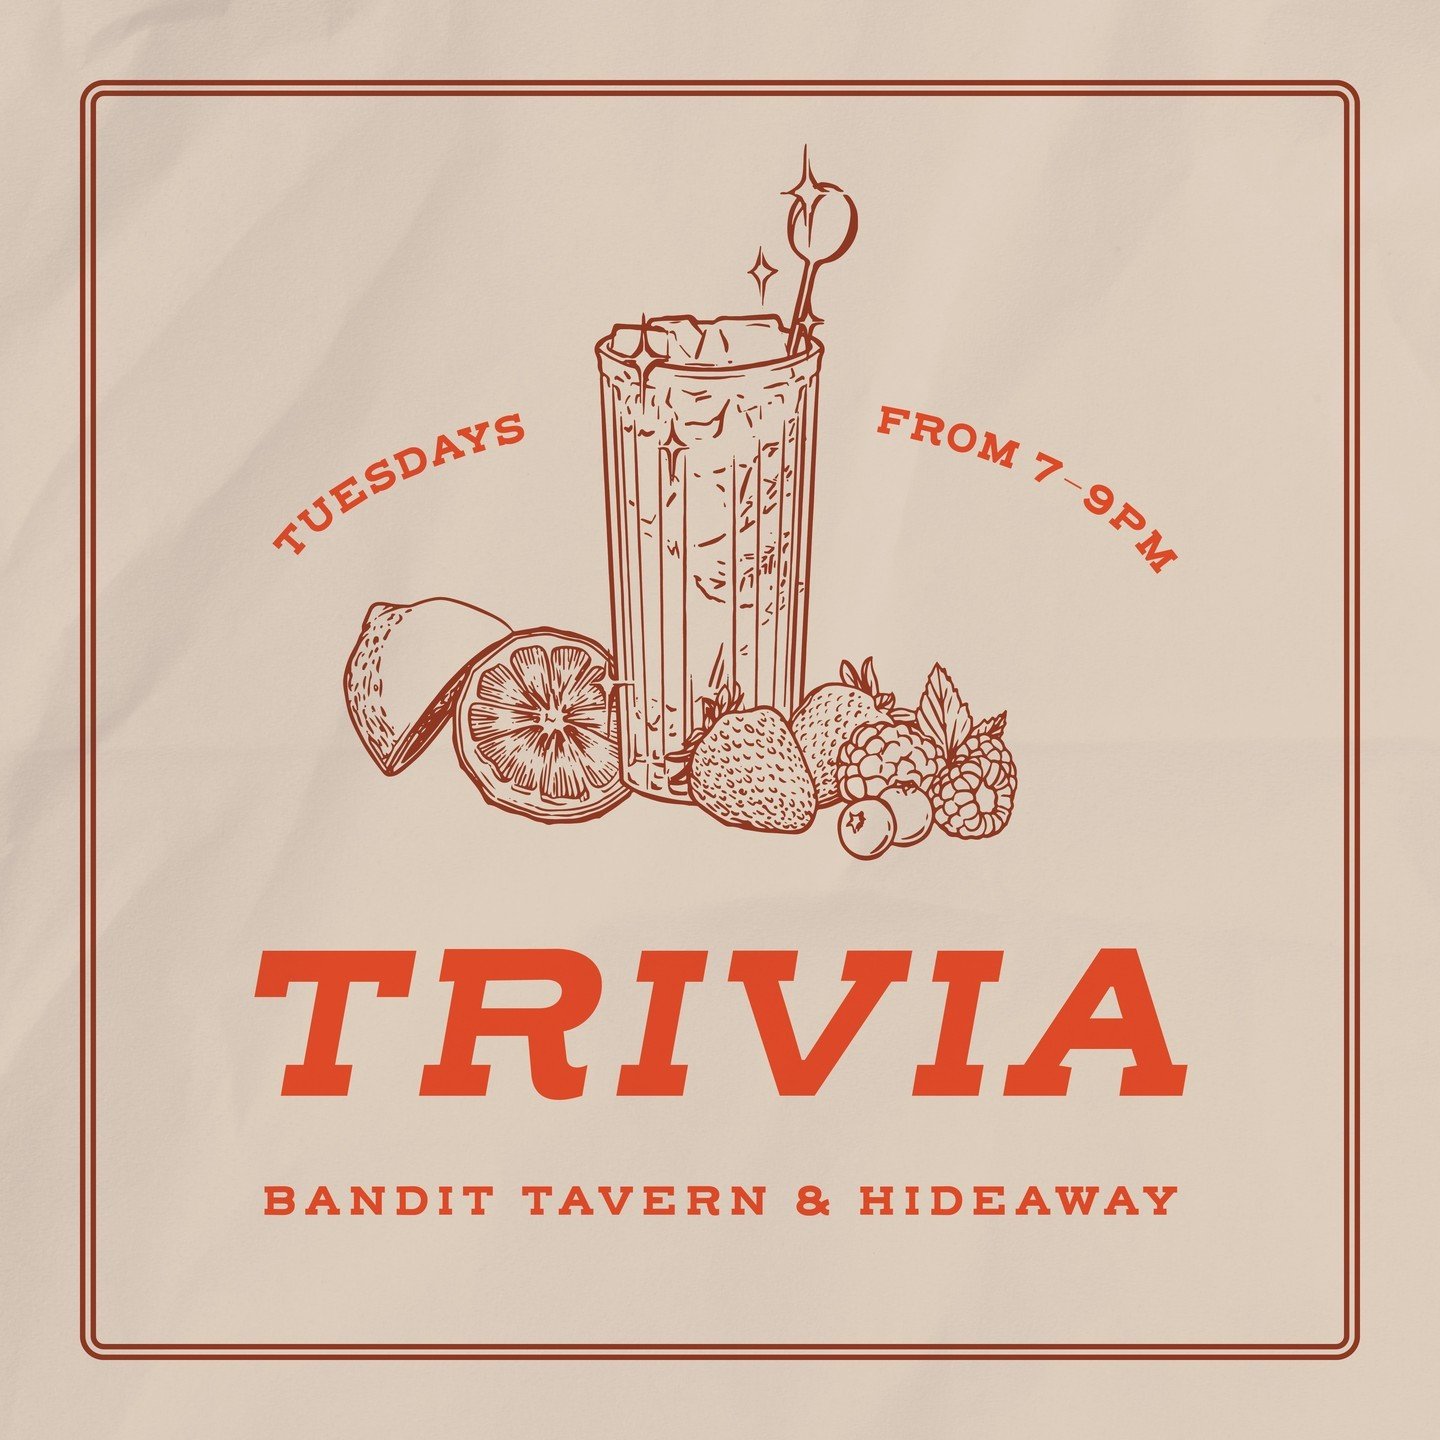 Will you be crowned the ultimate trivia champ? Join us tonight and find out.

#trivia #goodtime #goodfood #triviatuesday #geek  #champ